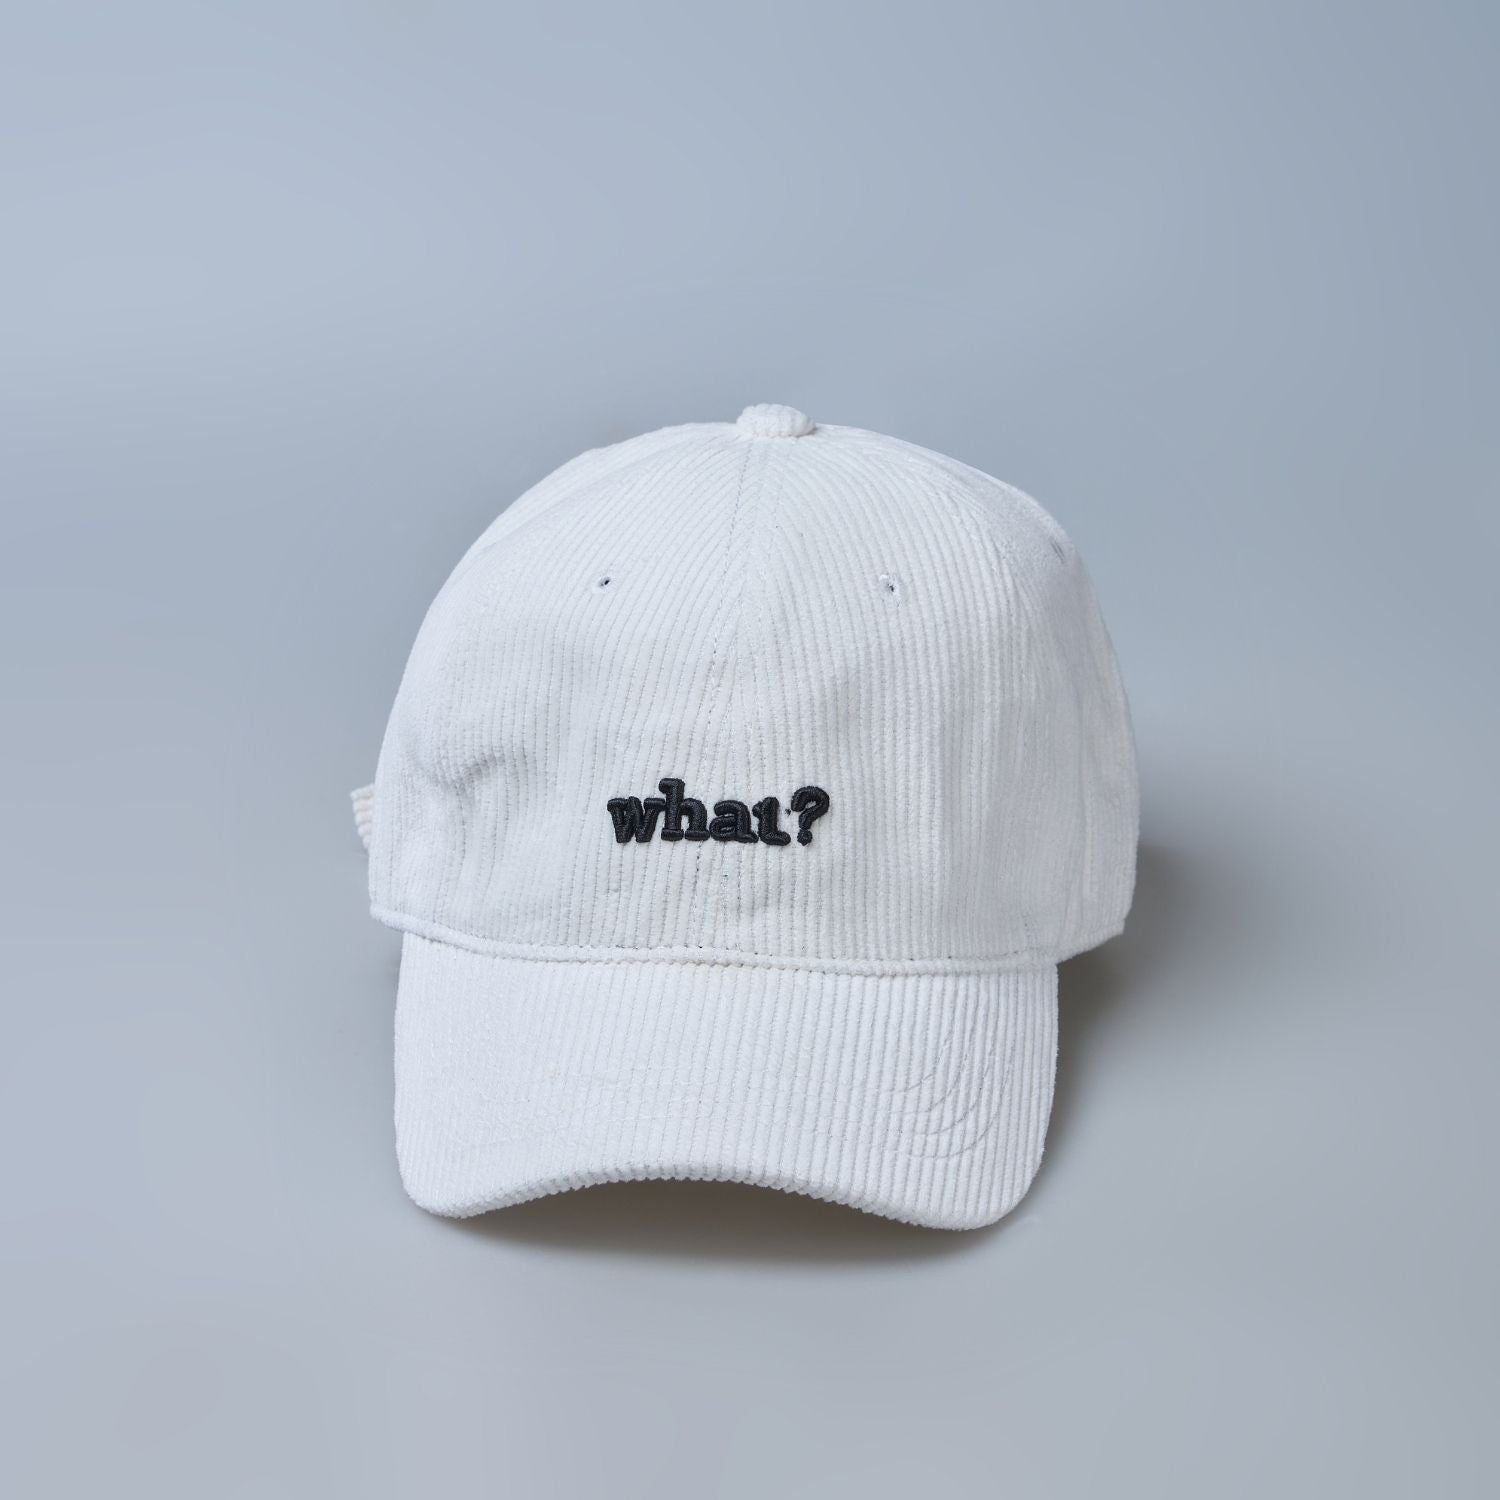 White colored cap for men with 'what' text written on it, front view.